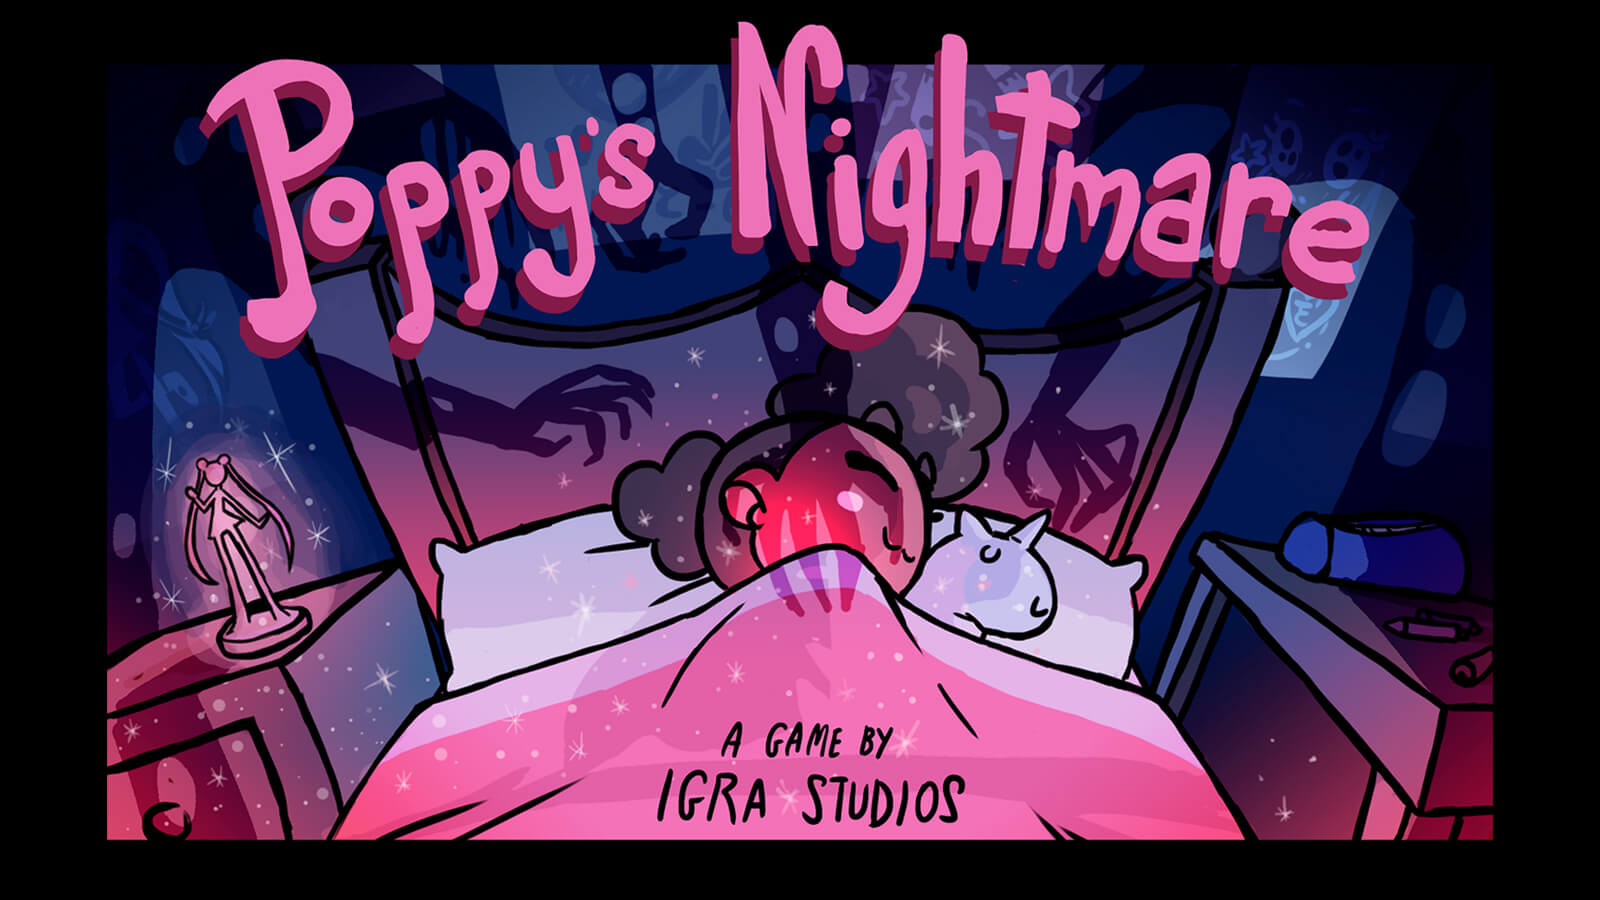 The title screen for Poppy&#039;s Nightmare, showing the main character sleeping in bed as scary, silhouetted hands reach towards her.